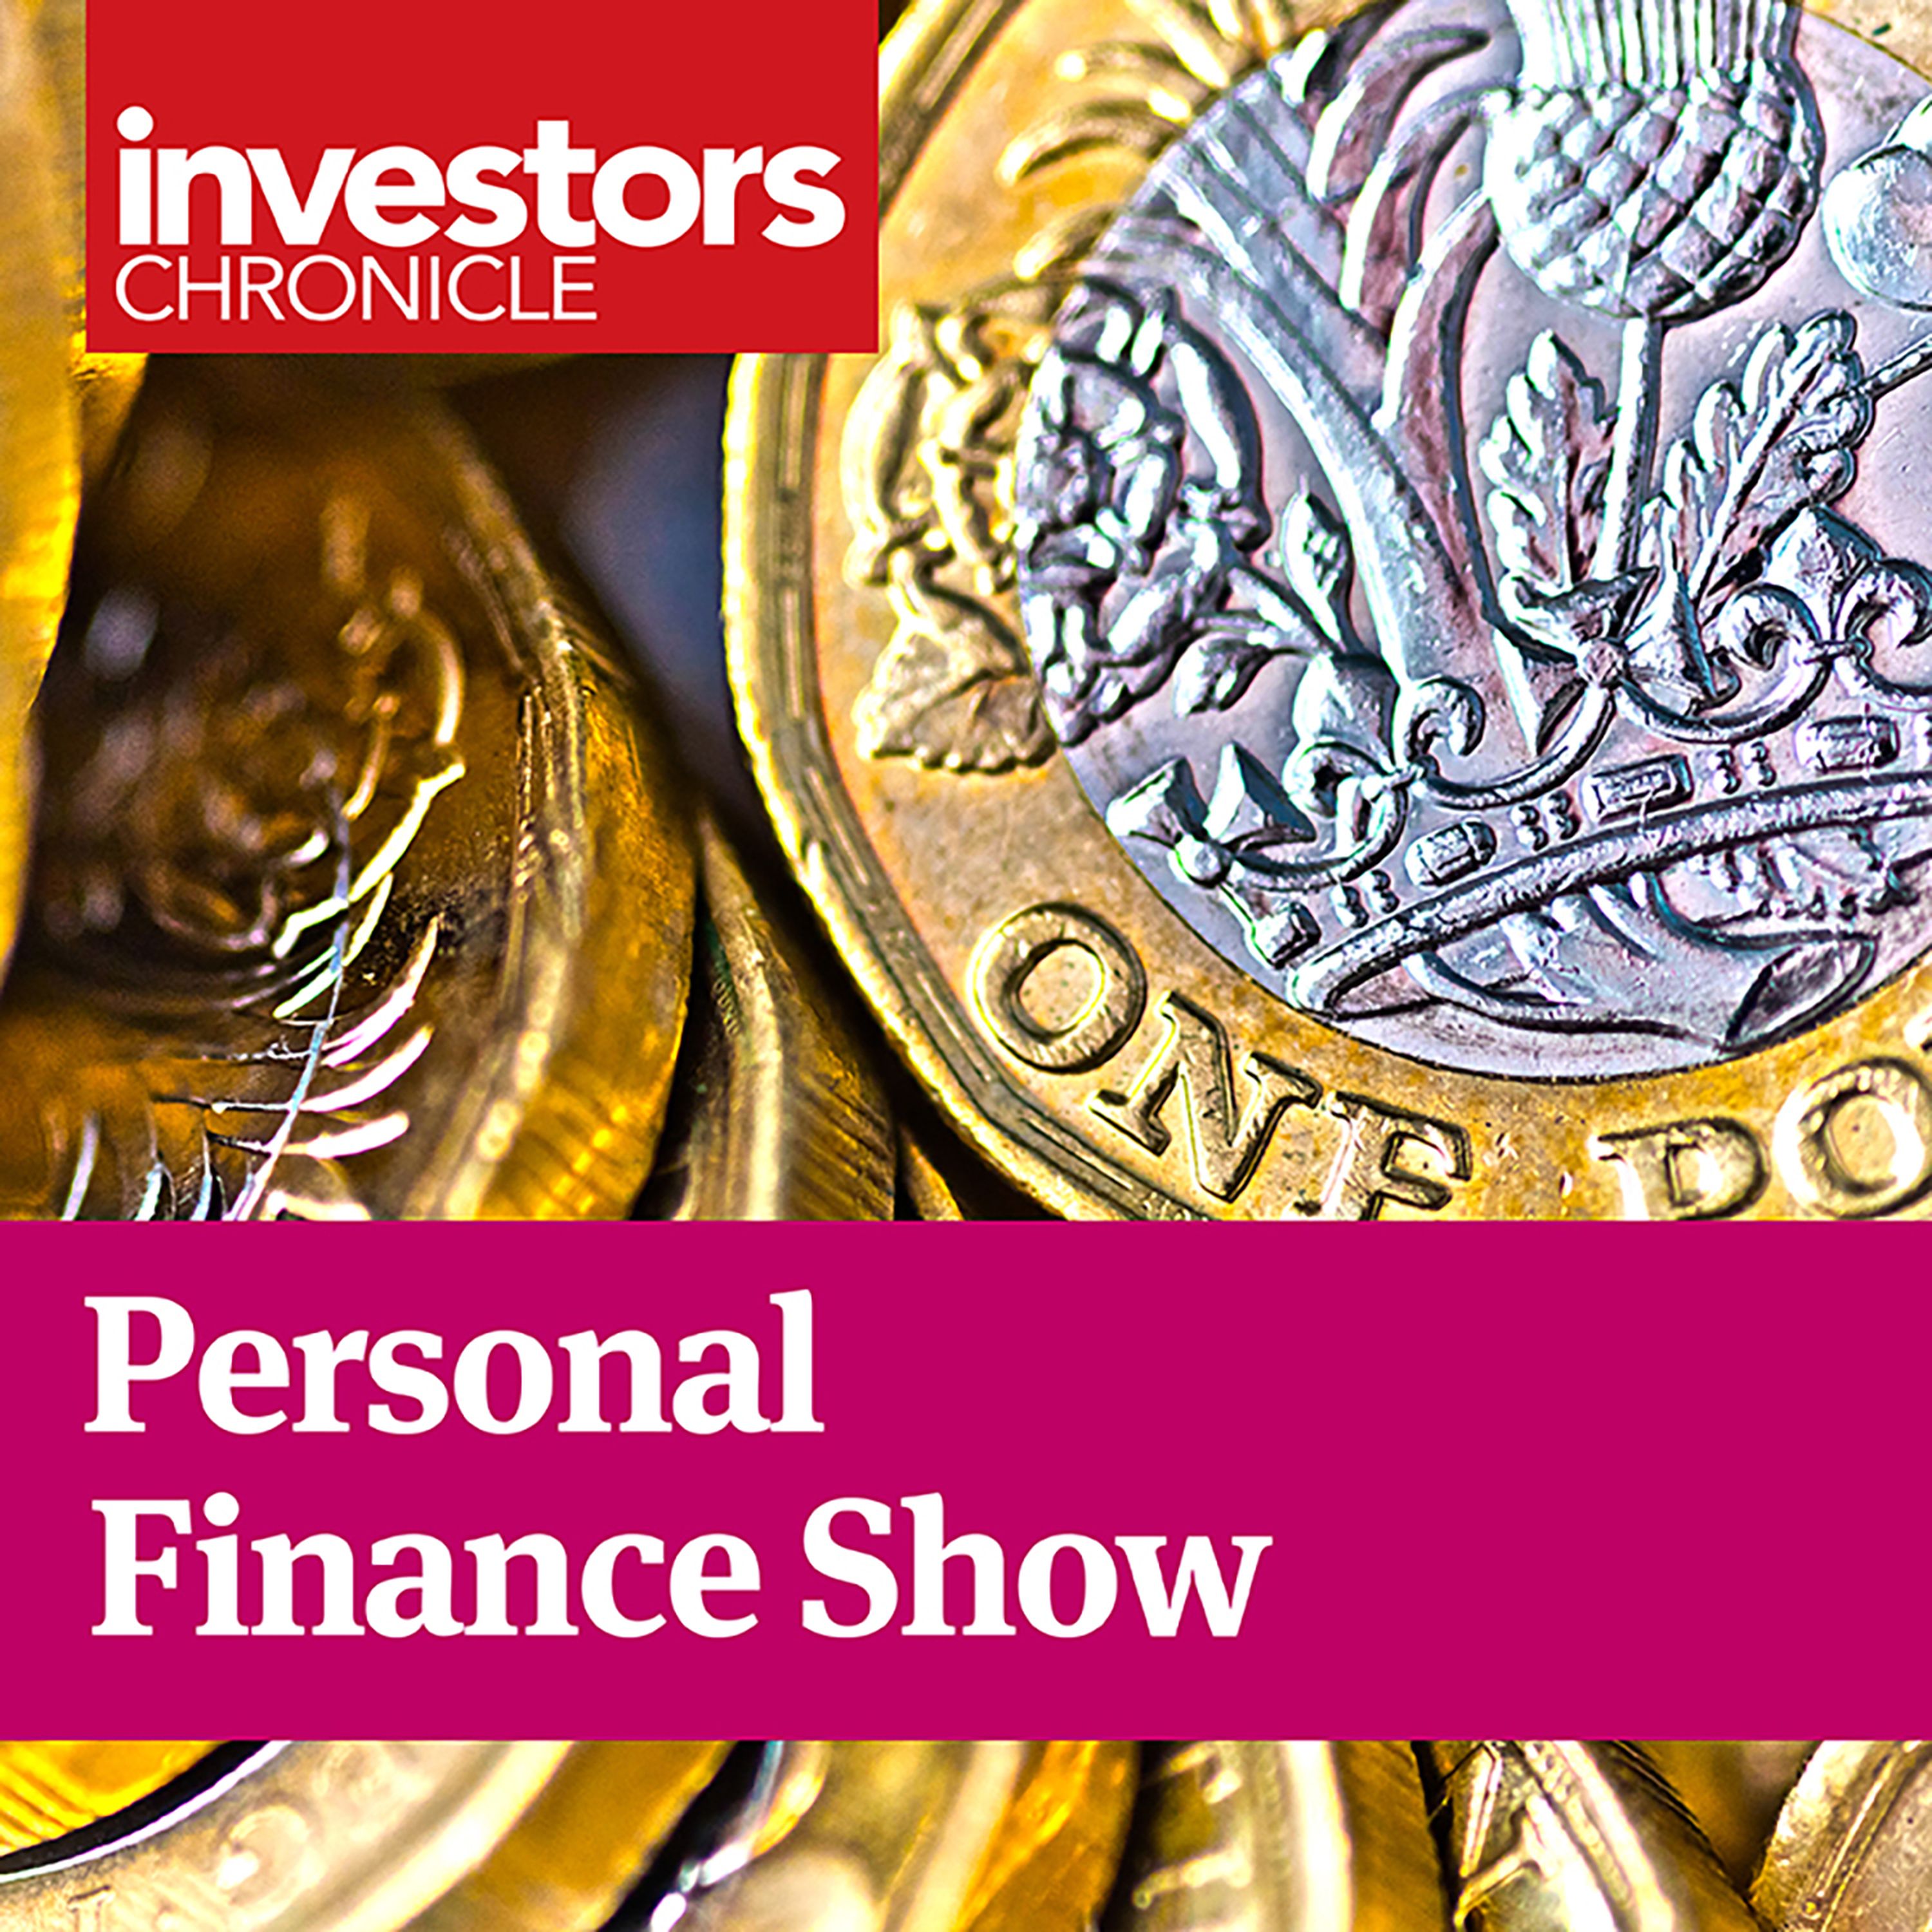 Personal Finance Show: Direct lending and the hunt for yield